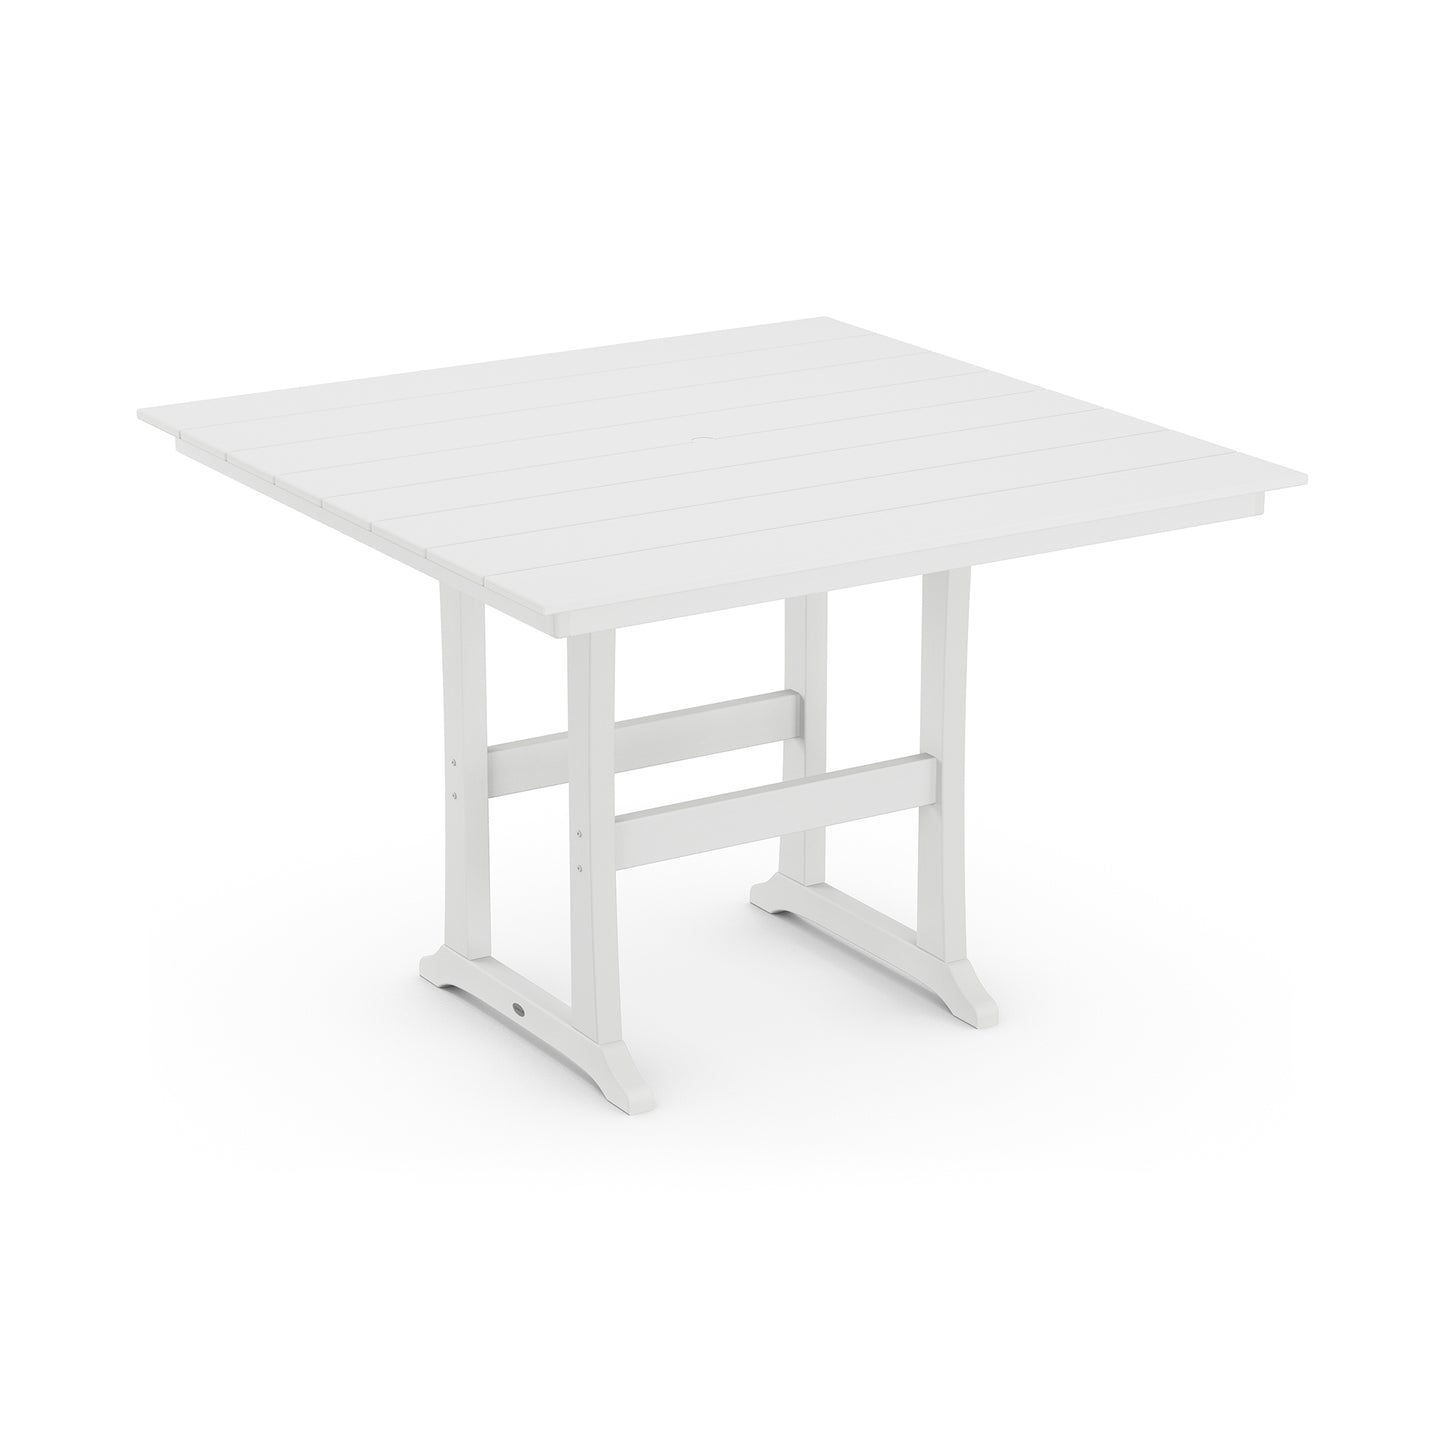 A simple white POLYWOOD Farmhouse Trestle 59" Bar Table with a rectangular top and a sturdy POLYWOOD® lumber frame. The table is set against a plain white background, emphasizing its clean and minimalistic design.